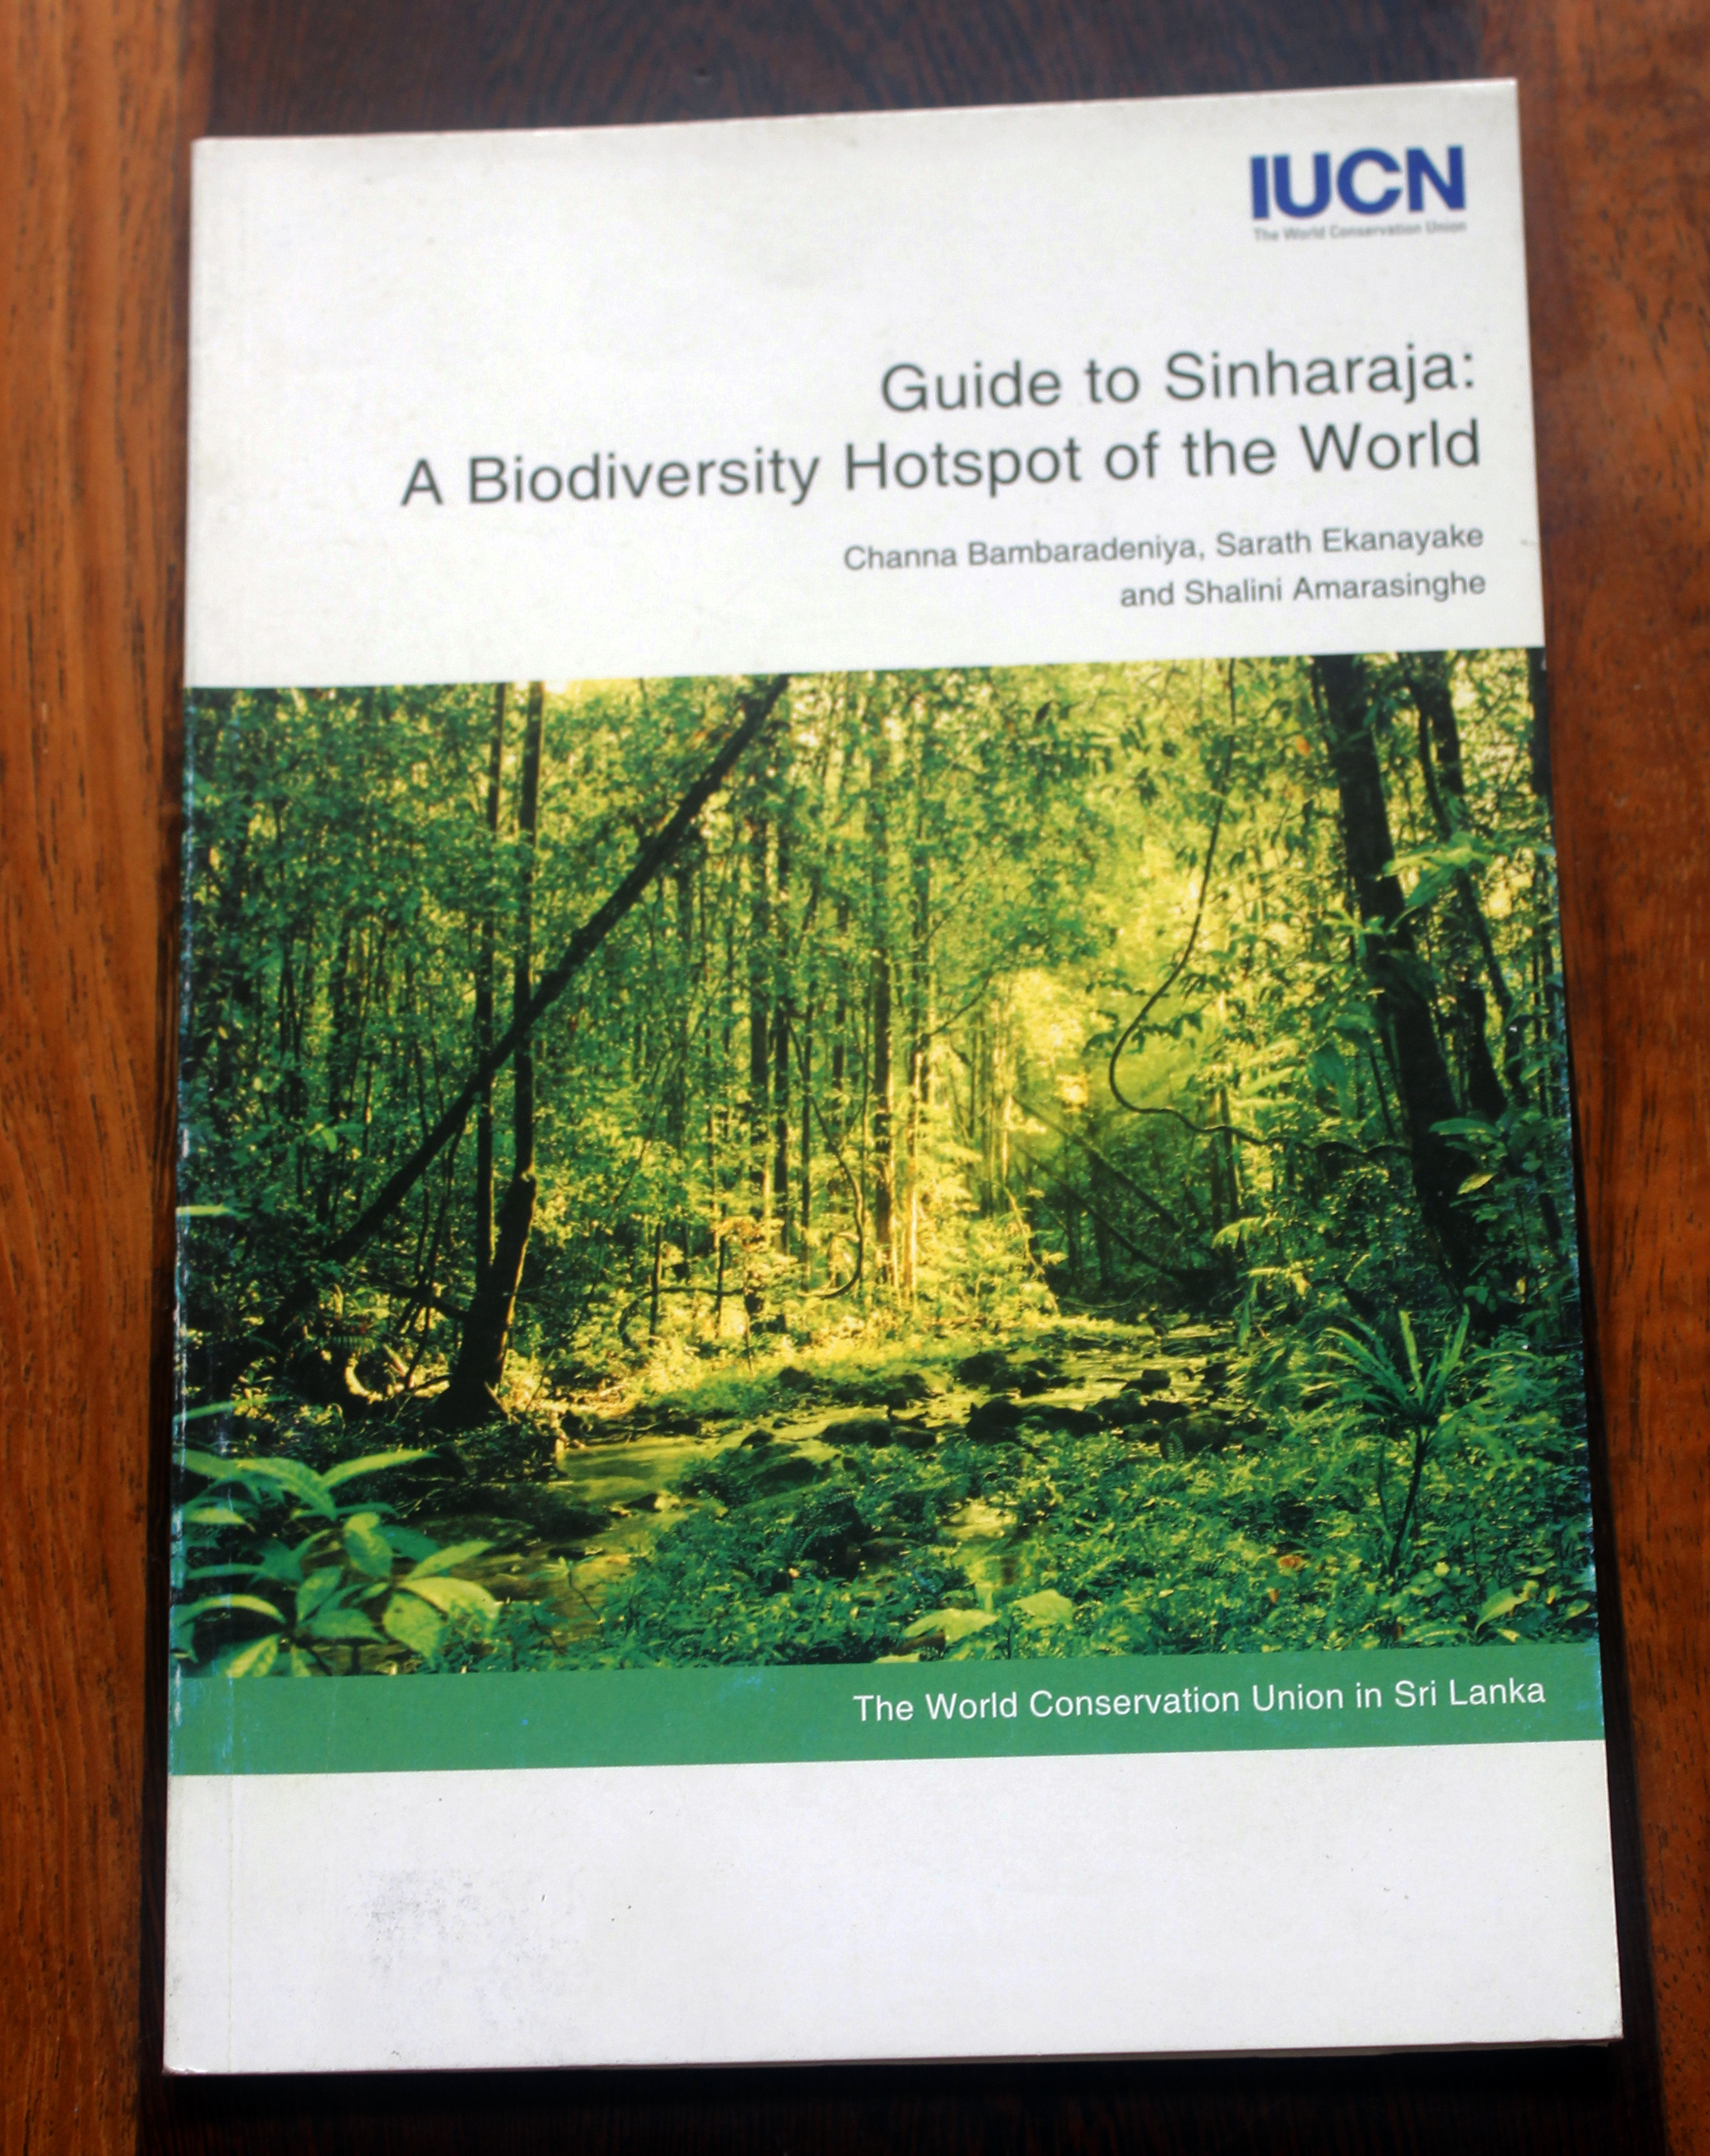 Guide to Sinharaja: A Biodiversity Hotspot of the World